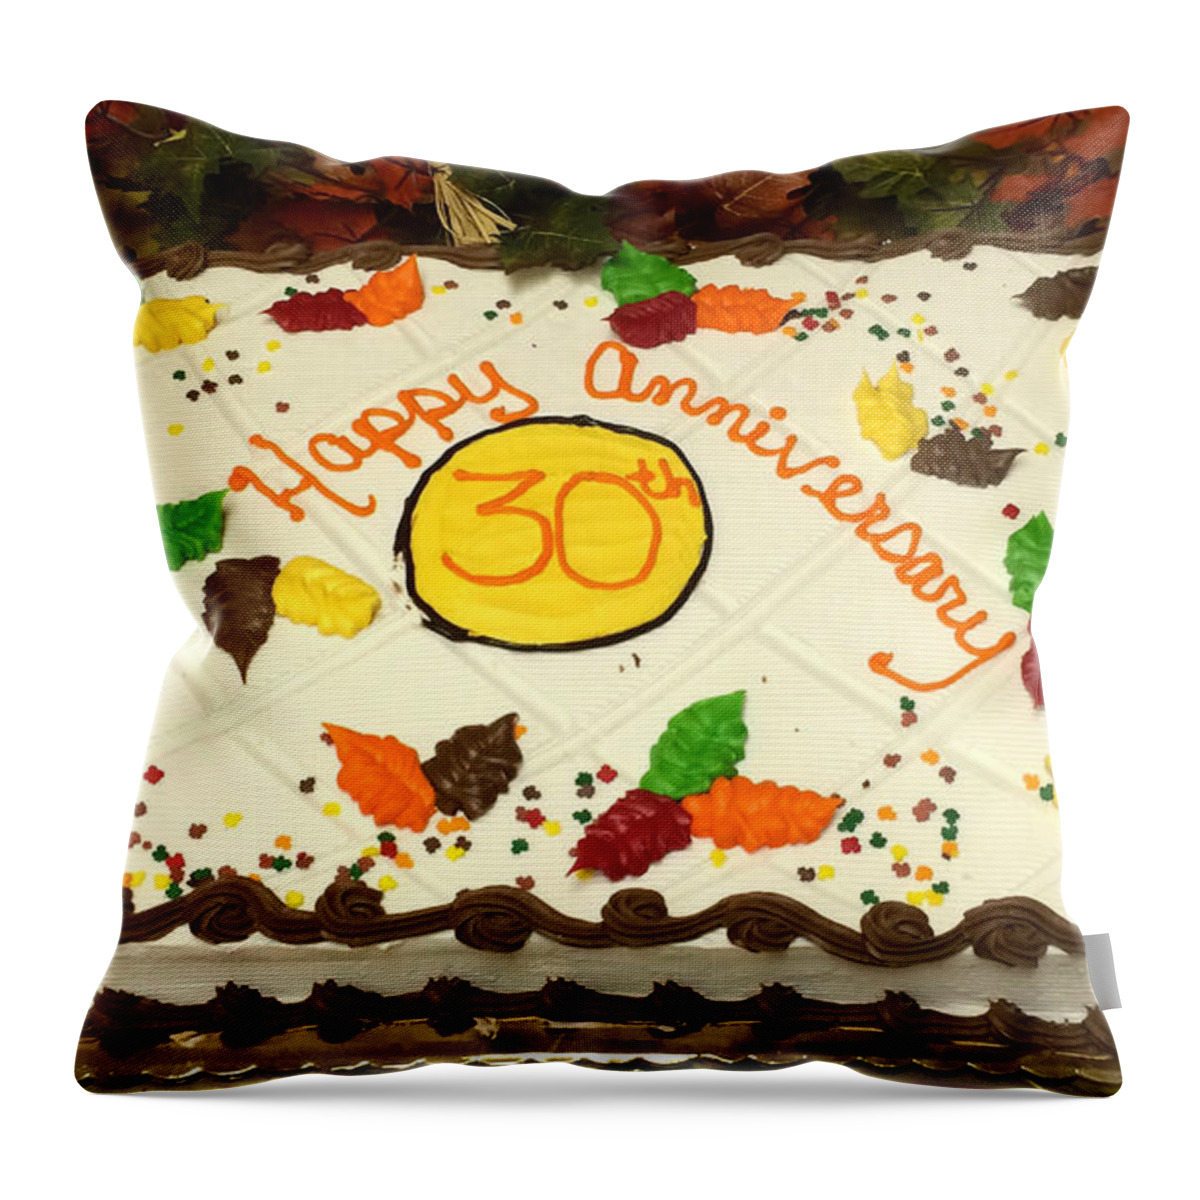 30 Throw Pillow featuring the photograph Happy 30th Anniversary by Chris W Photography AKA Christian Wilson